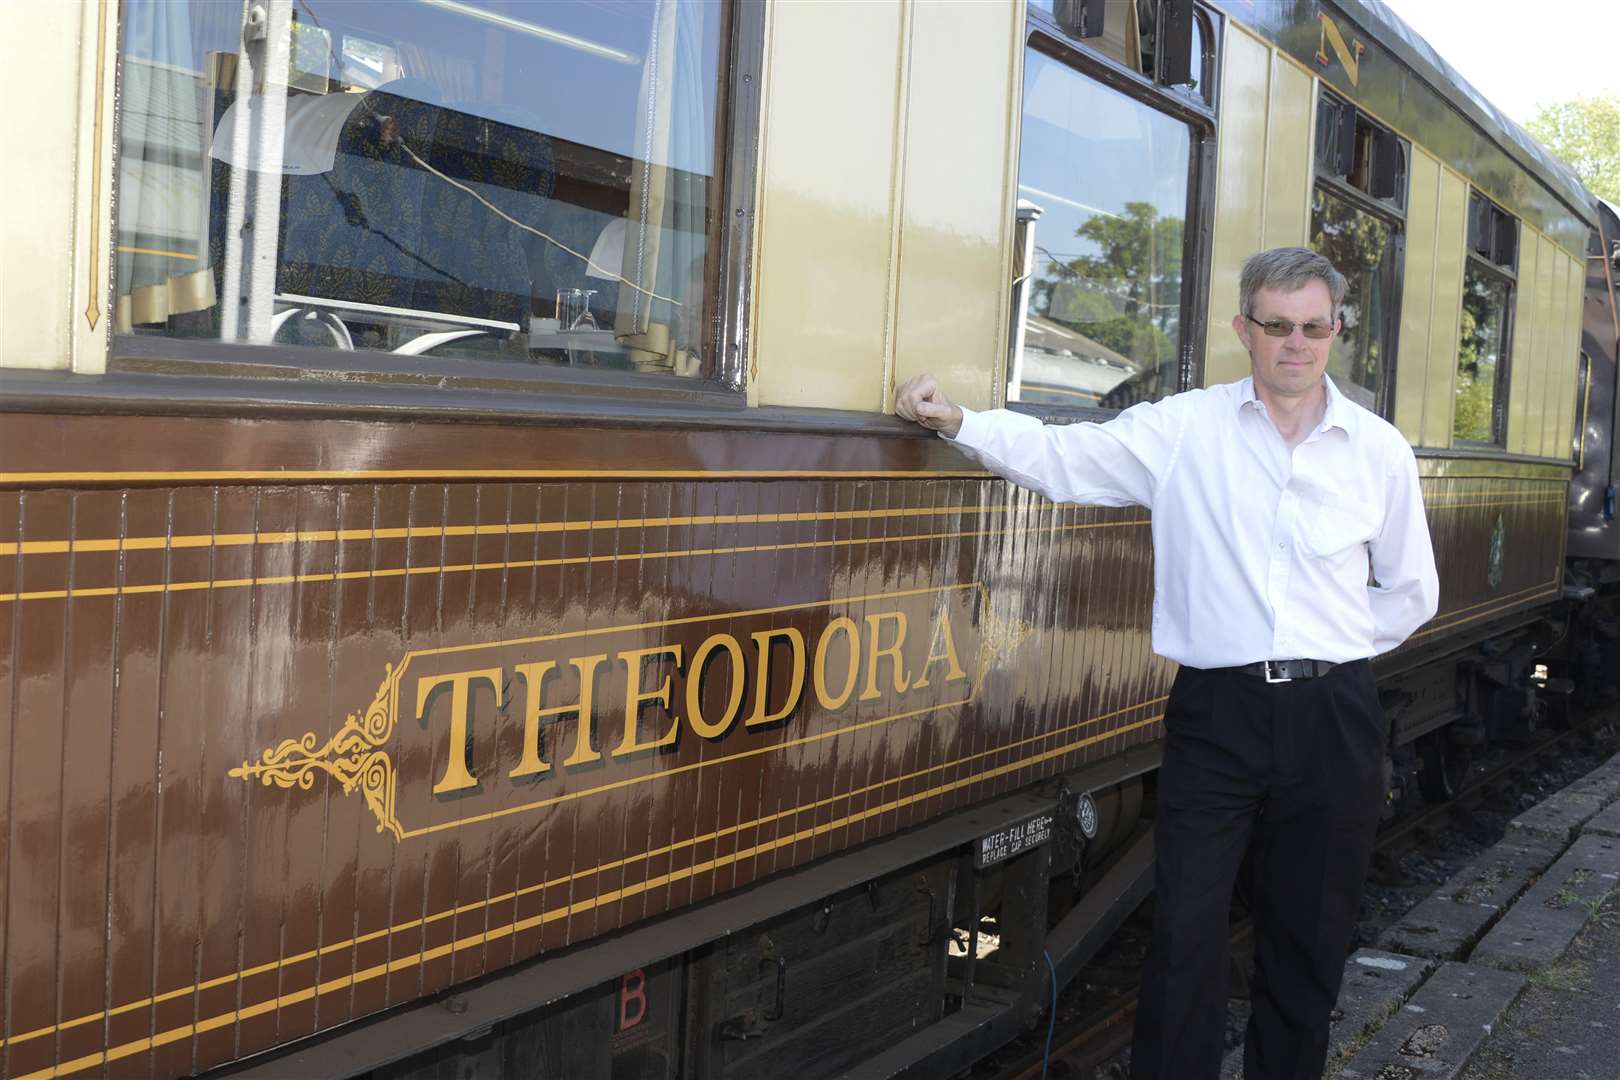 Kent and East Sussex Railway commercial manager Andre Freeman standing next to Theodora. Picture: Paul Amos